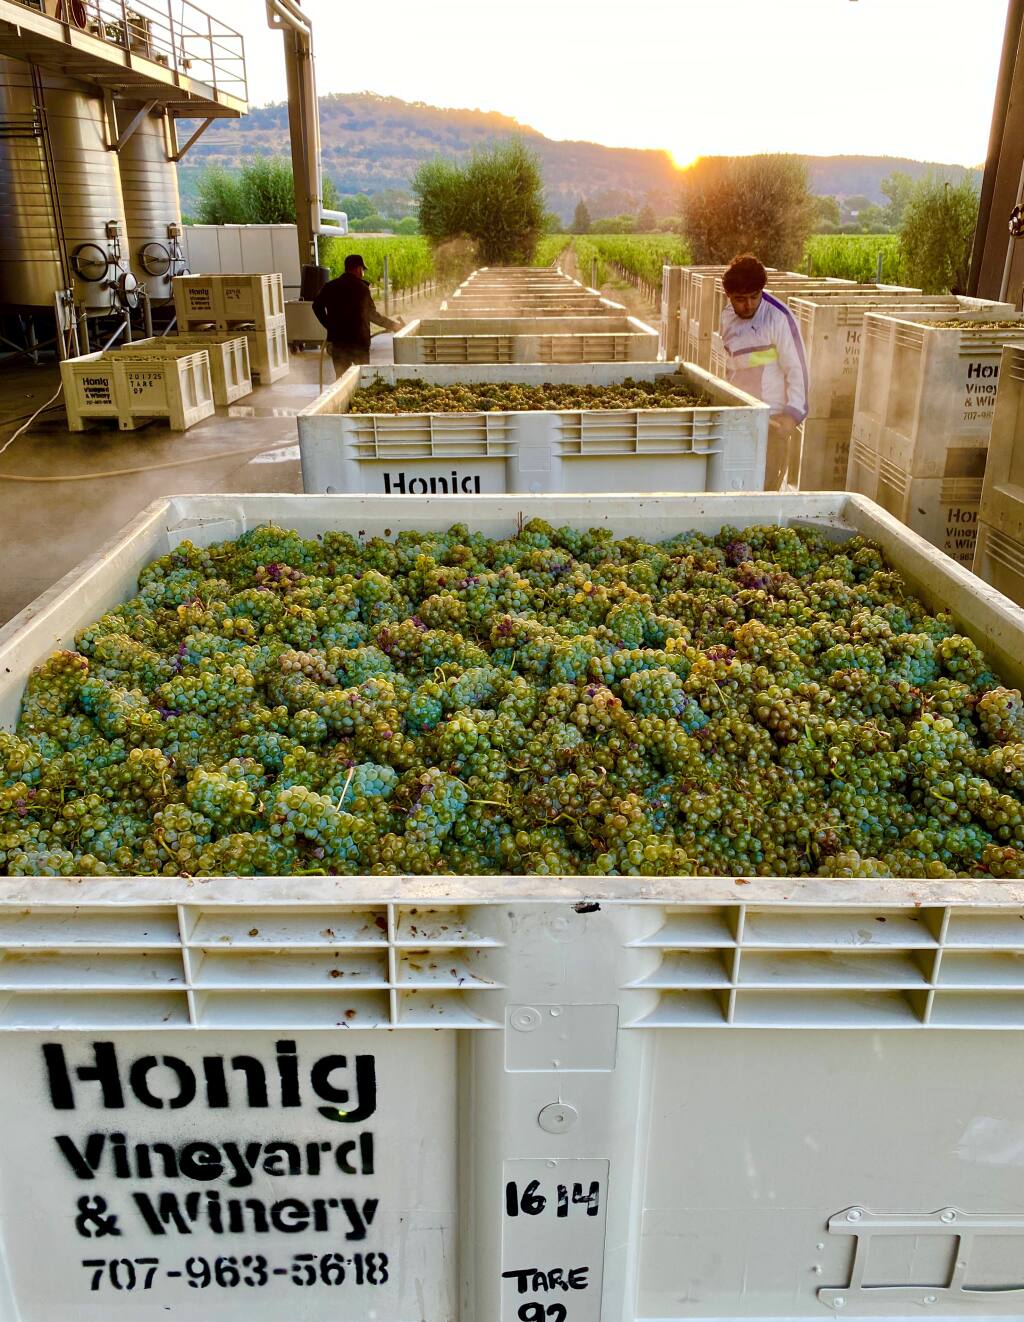 Honig Vineyard & Winery in Rutherford received Napa Valley’s first wine grapes of the 2022 season, with 25 tons of sauvignon blanc picked from Gordon Family Ranch in southeast Napa Valley the night of Aug. 1-2. (Regina Weinstein photo)